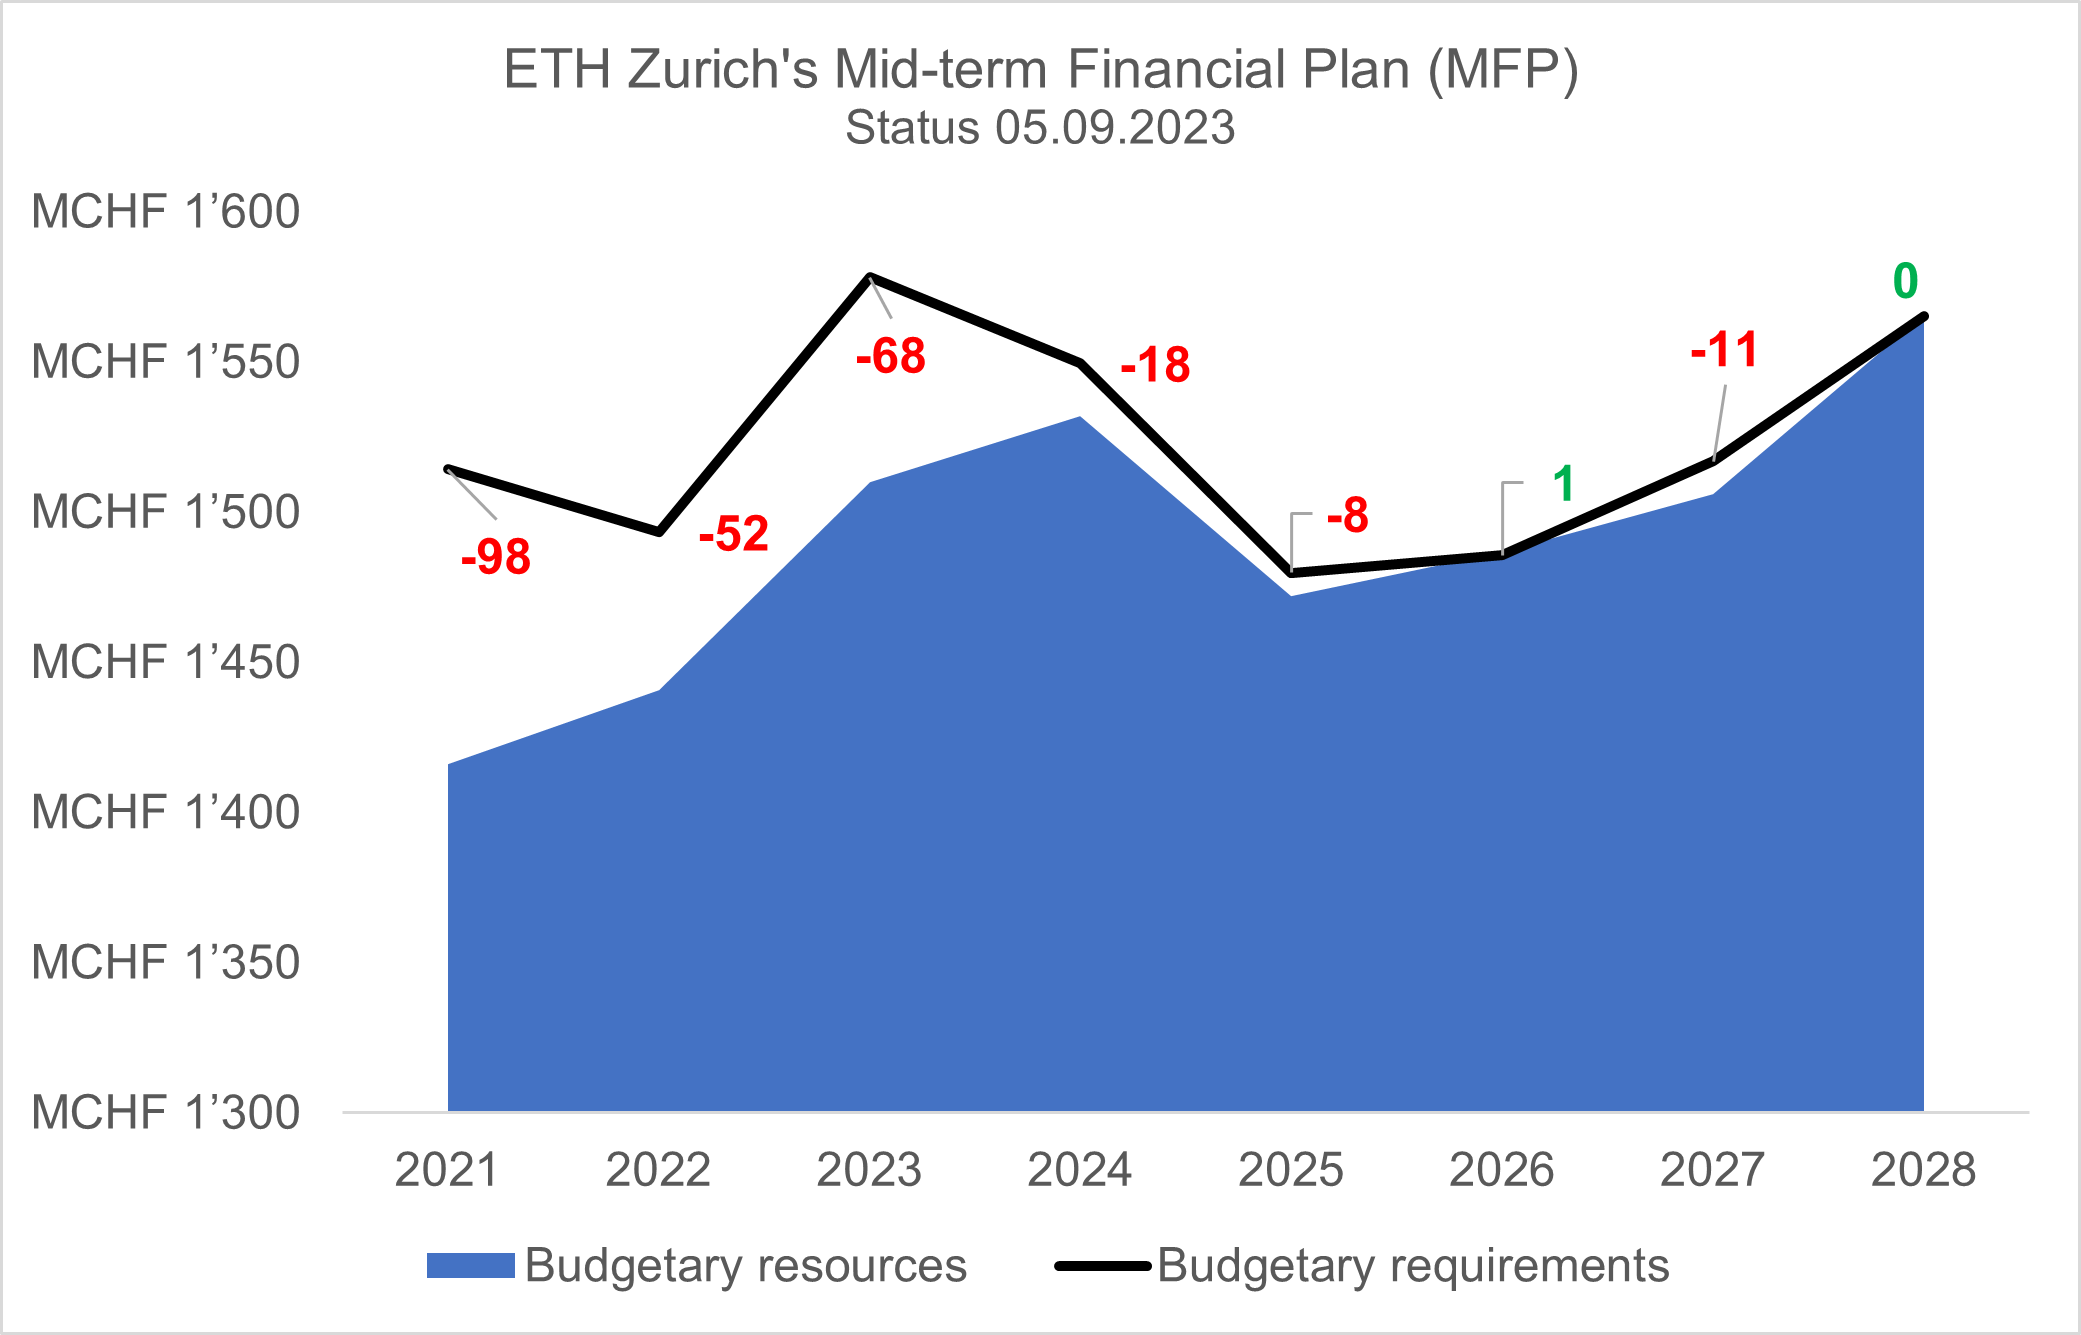 Enlarged view: ETH Zurich's Mid-term Financial Plan (MFP) - Status 05.09.2023